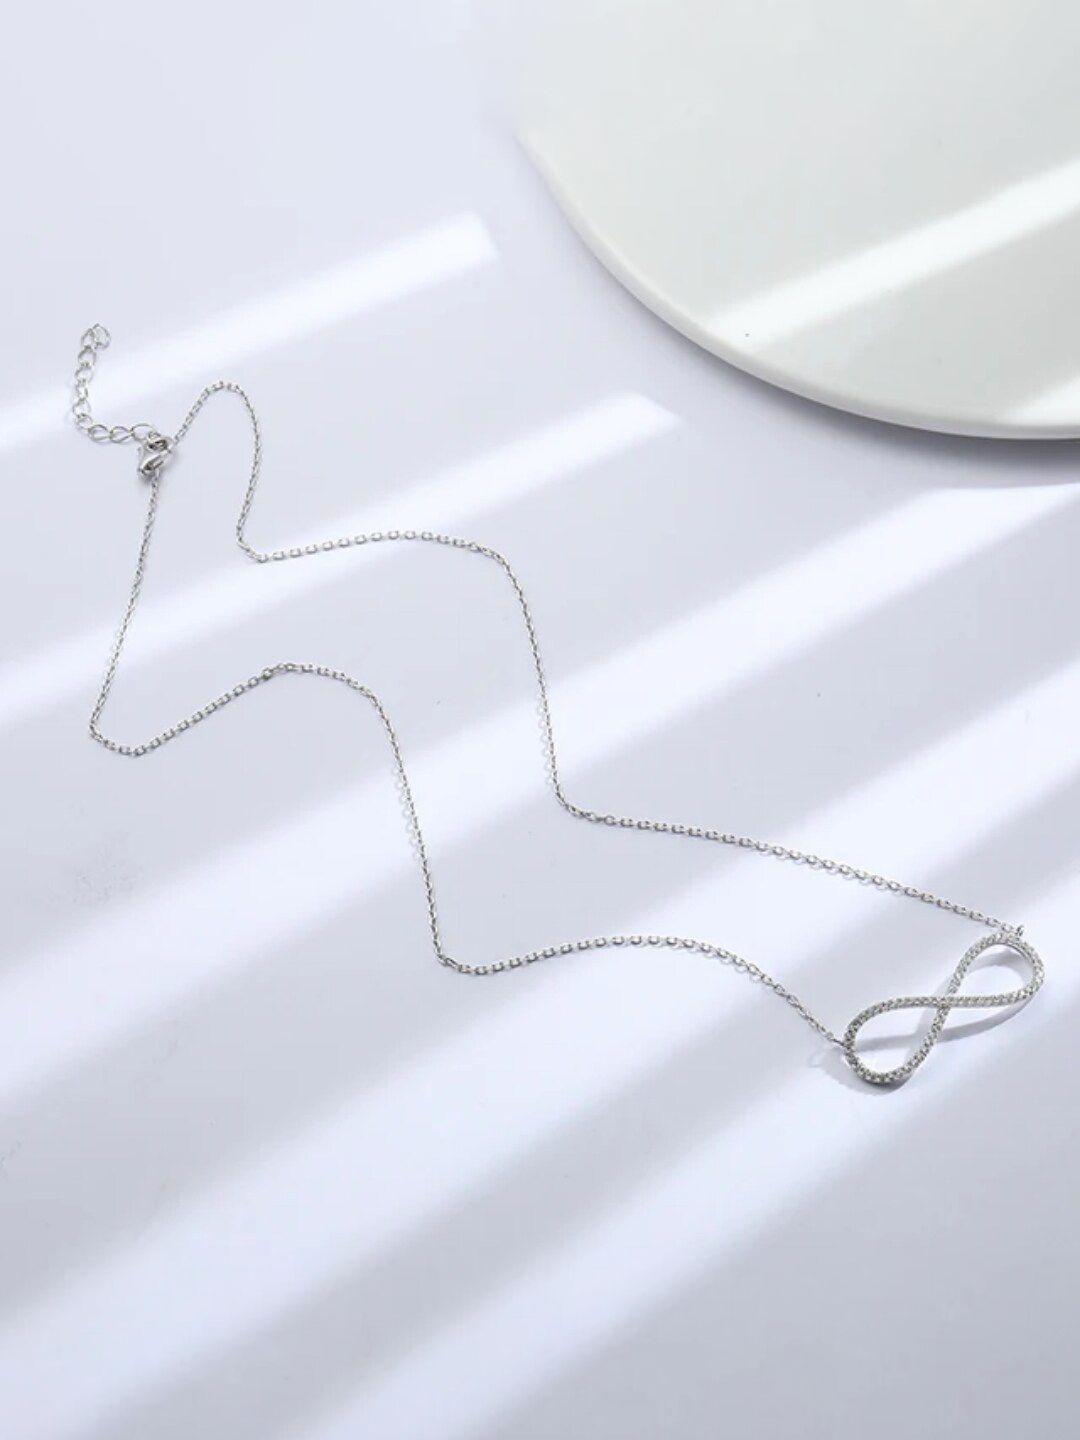 salty stainless steel silver-plated necklace